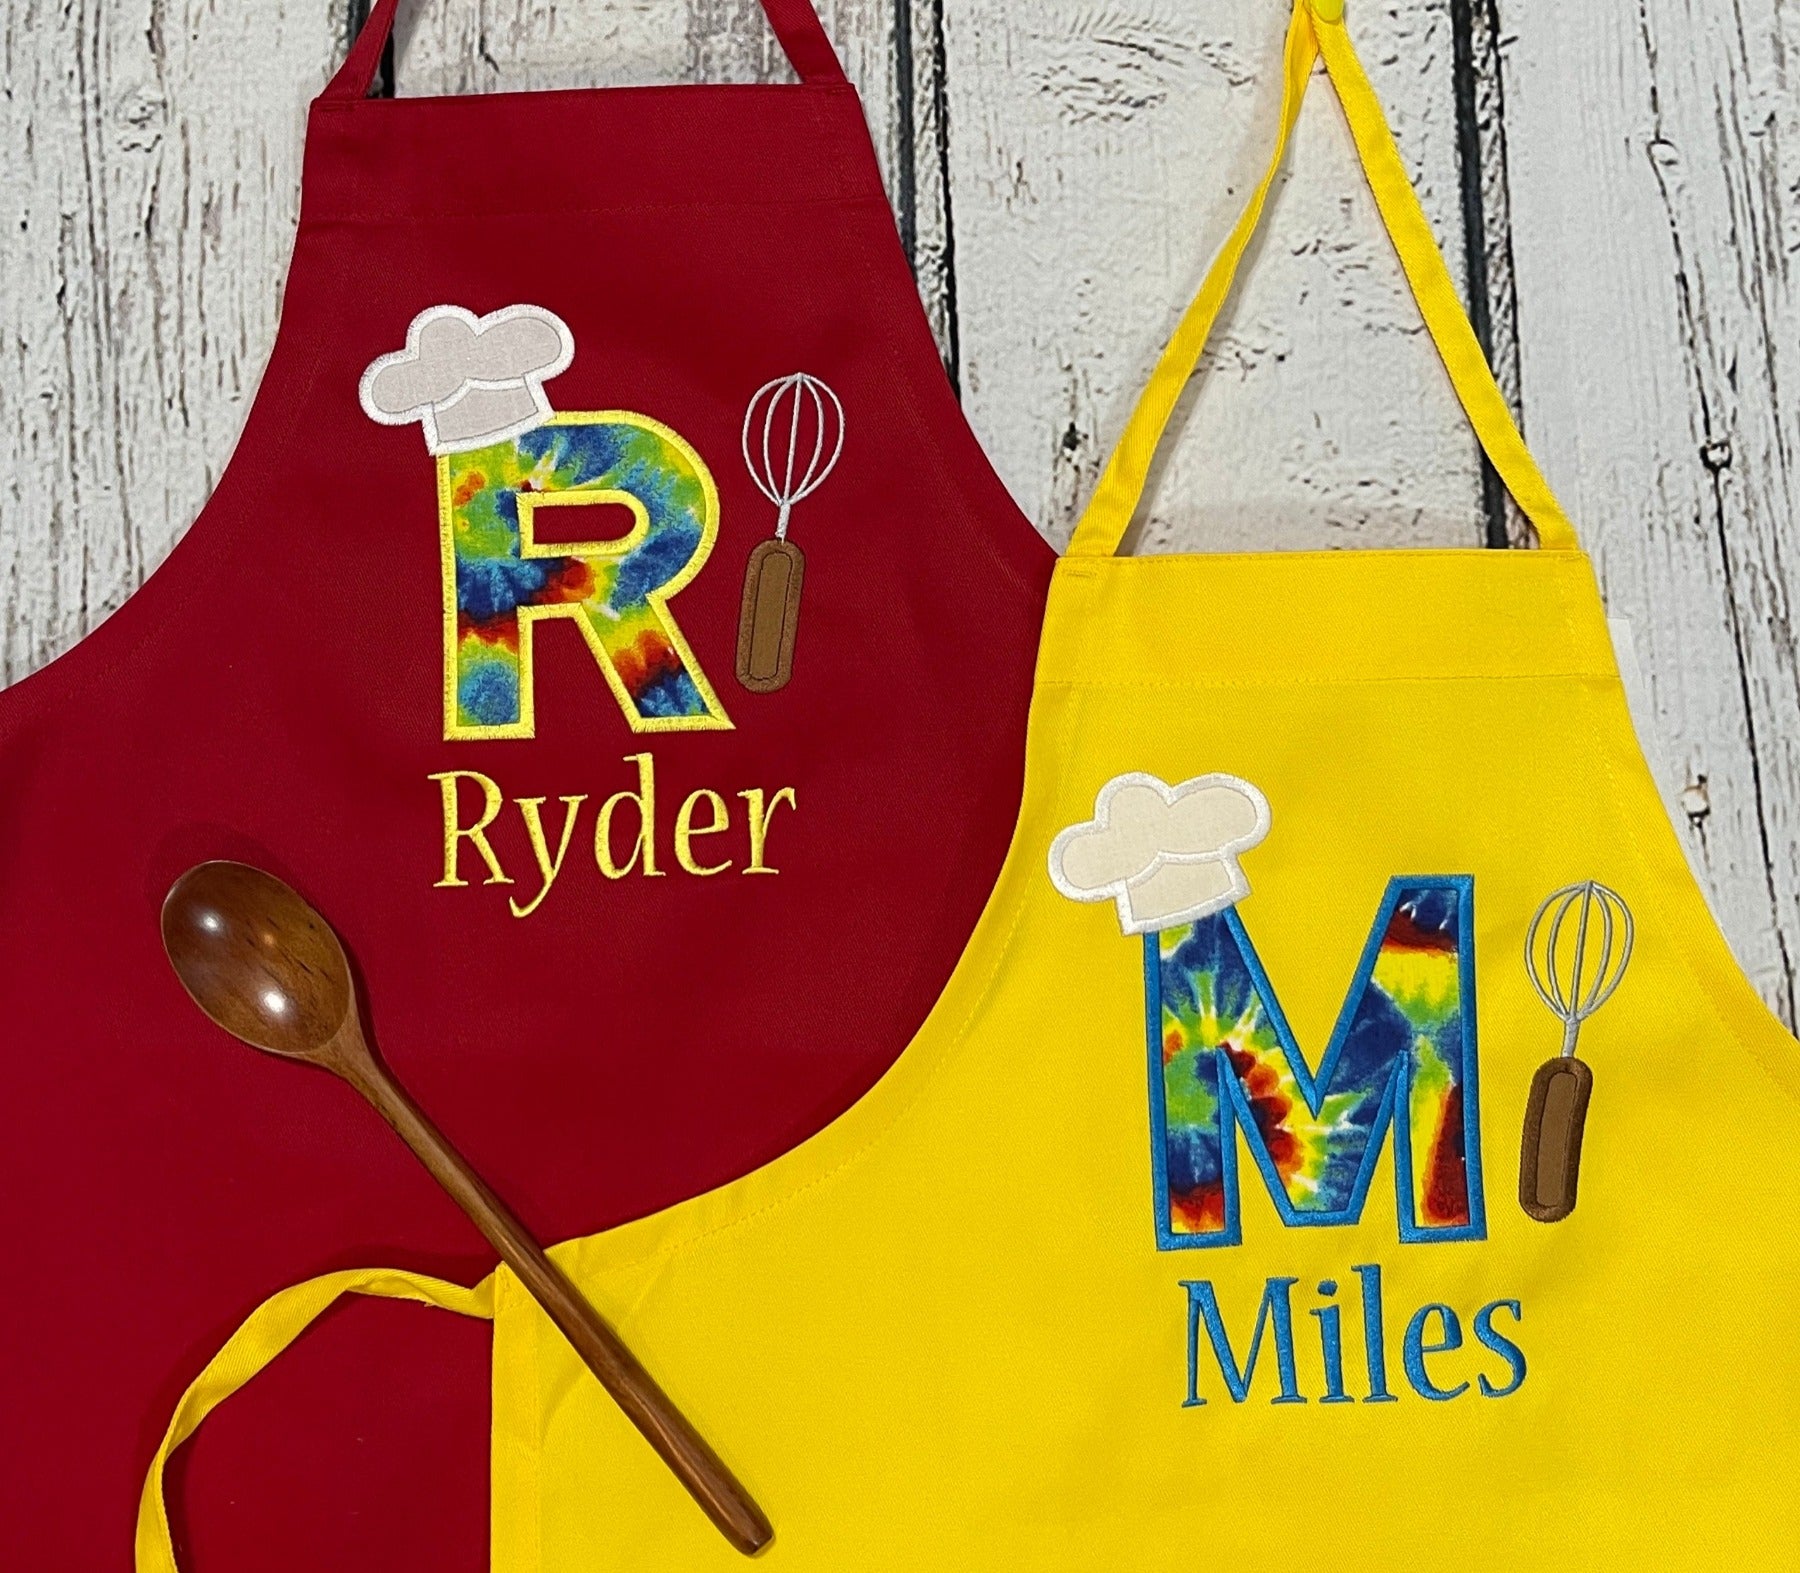 Kids personalized aprons one red one yellow with embroidered name and tie dye fabric